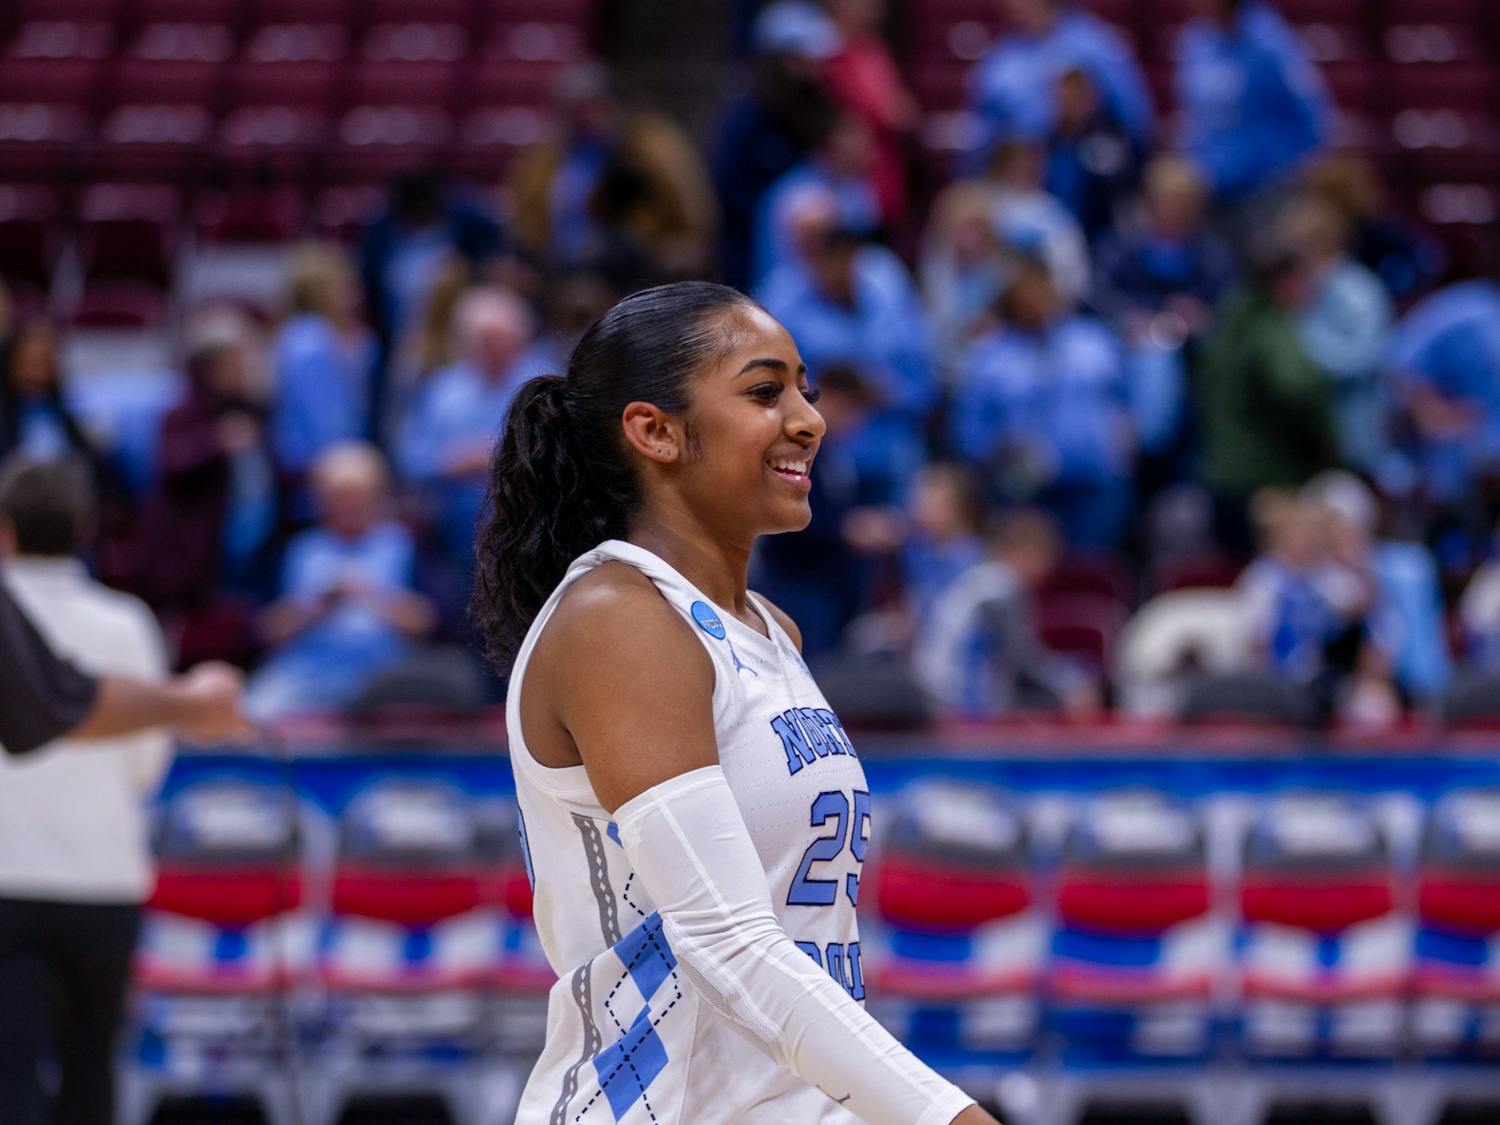 UNC junior guard Deja Kelly smiles after UNC’s NCAA Tournament first-round game against the St. John’s Red Storm in the Schottenstein Center in Columbus, Ohio on Saturday, March 18, 2023. The Tar Heels won 61-59.